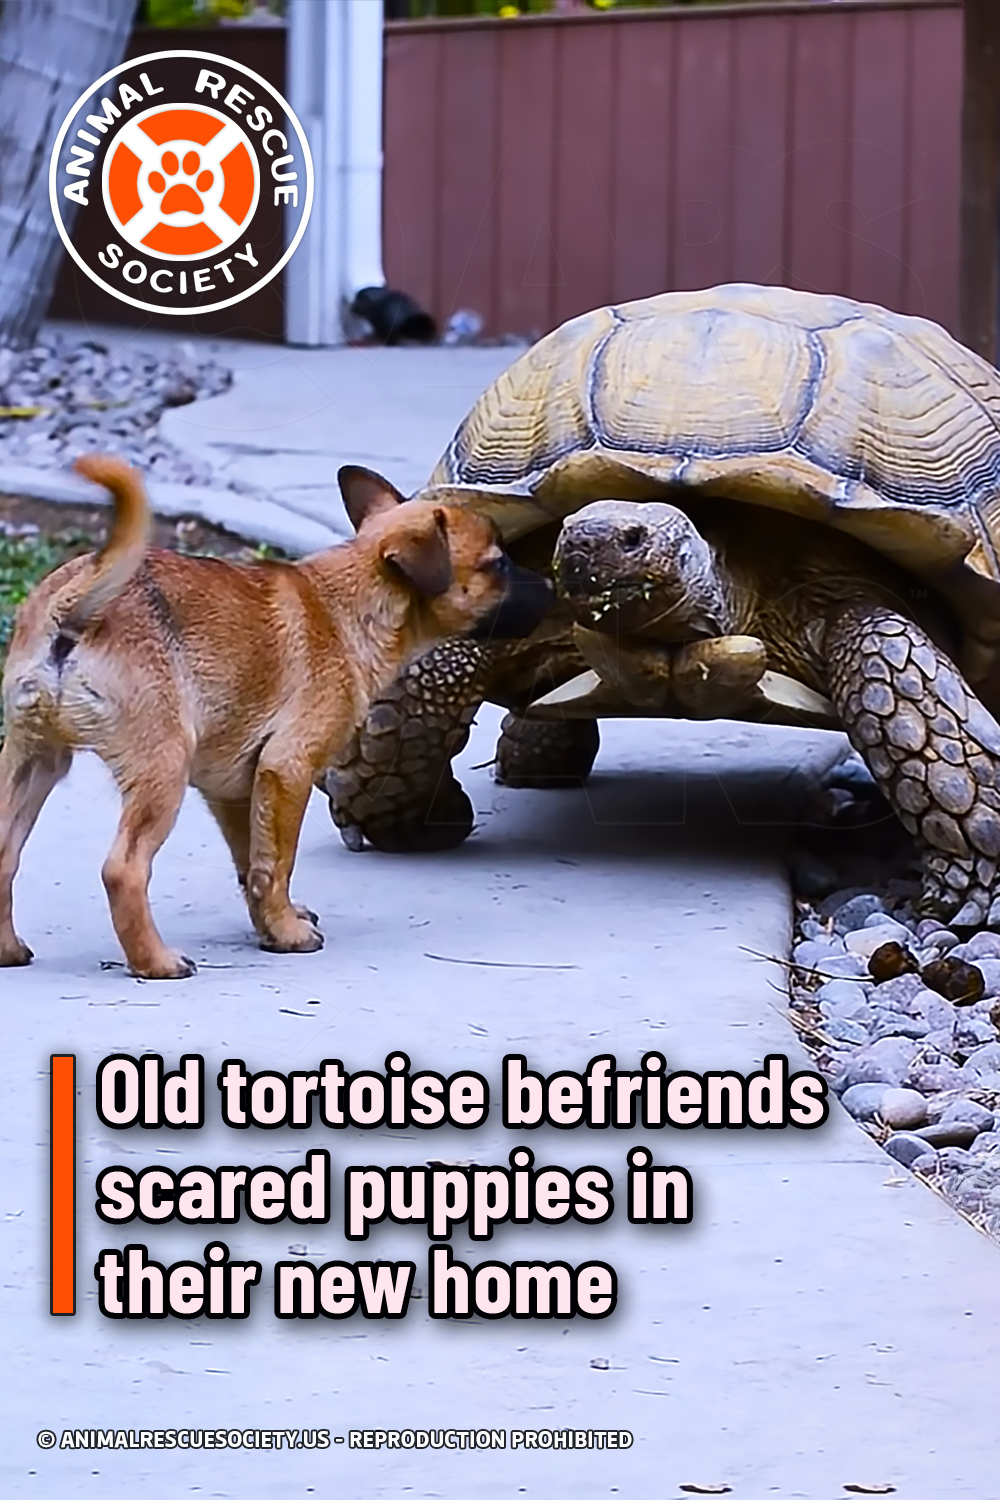 Old tortoise befriends scared puppies in their new home